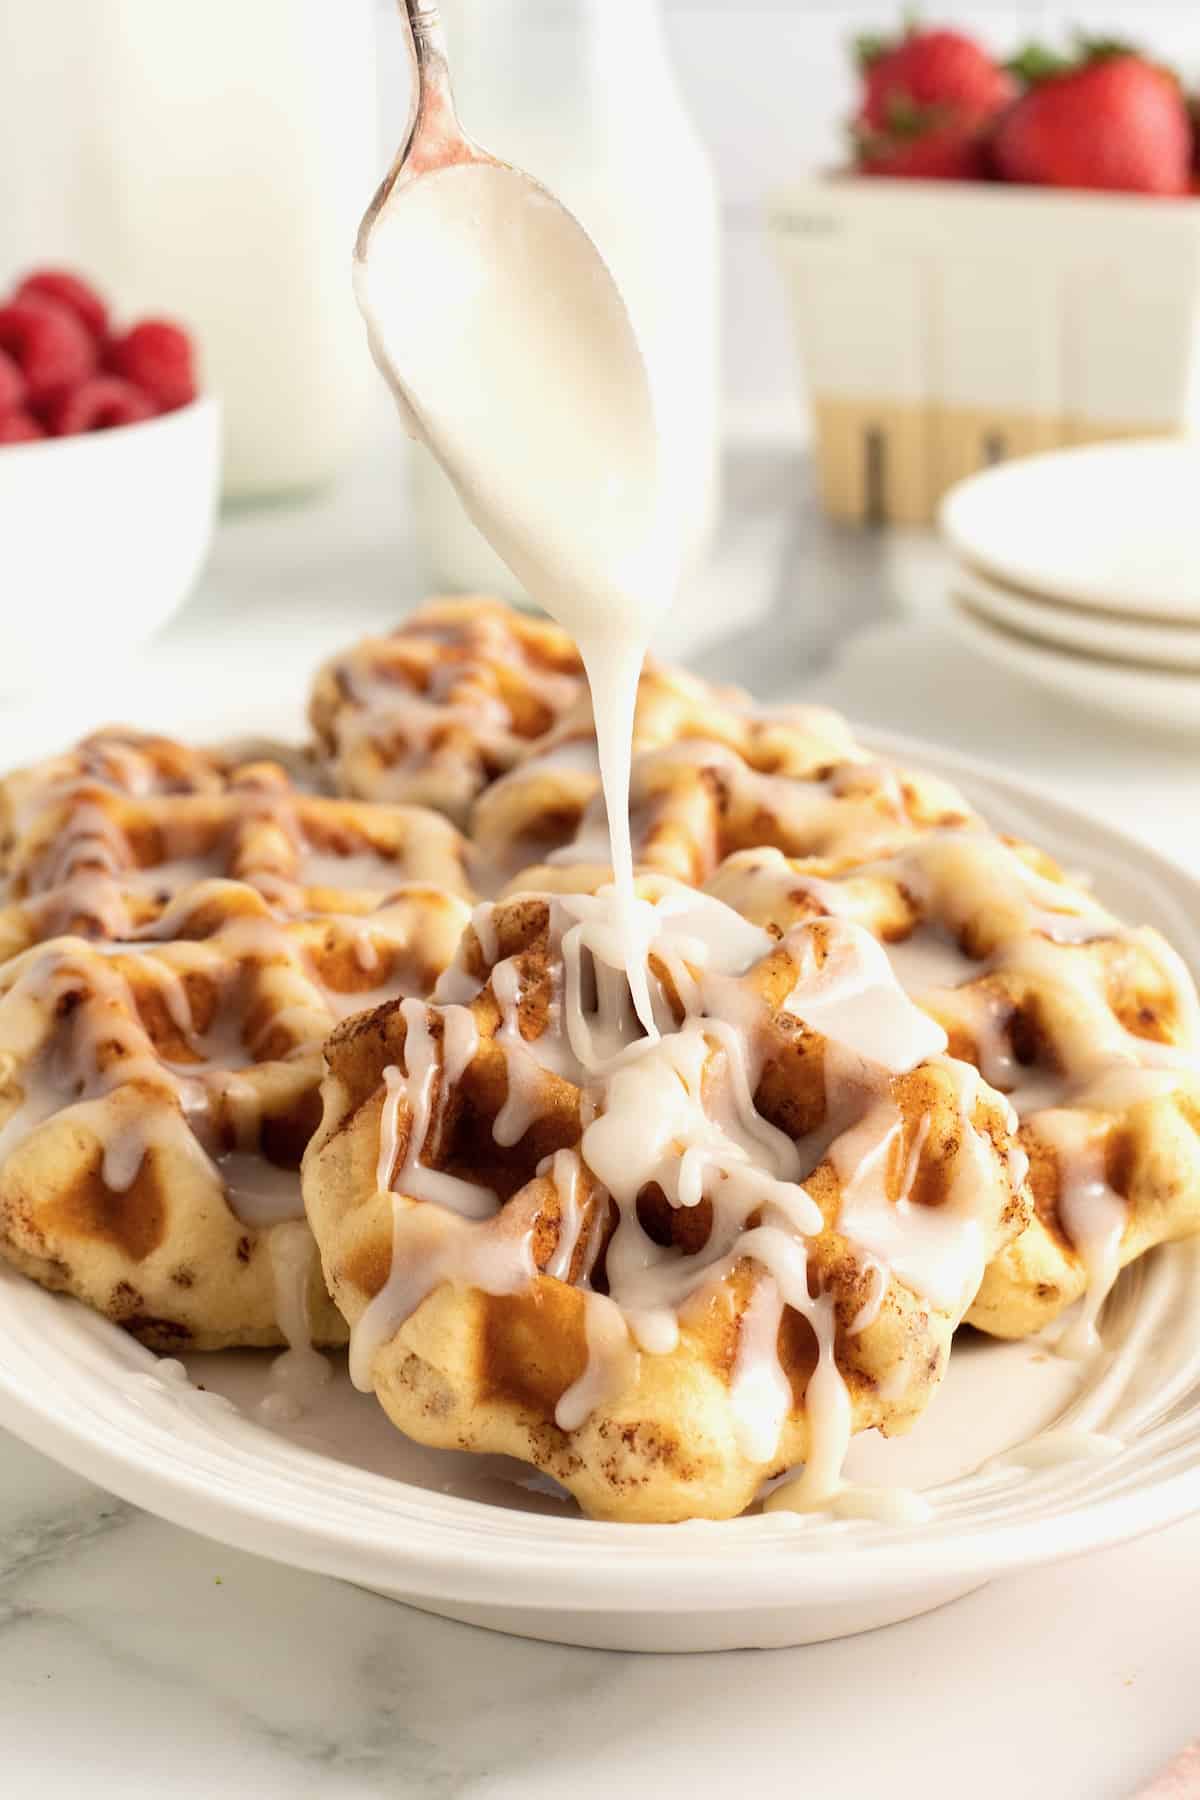 Cinnamon Roll Waffles from The BakerMama